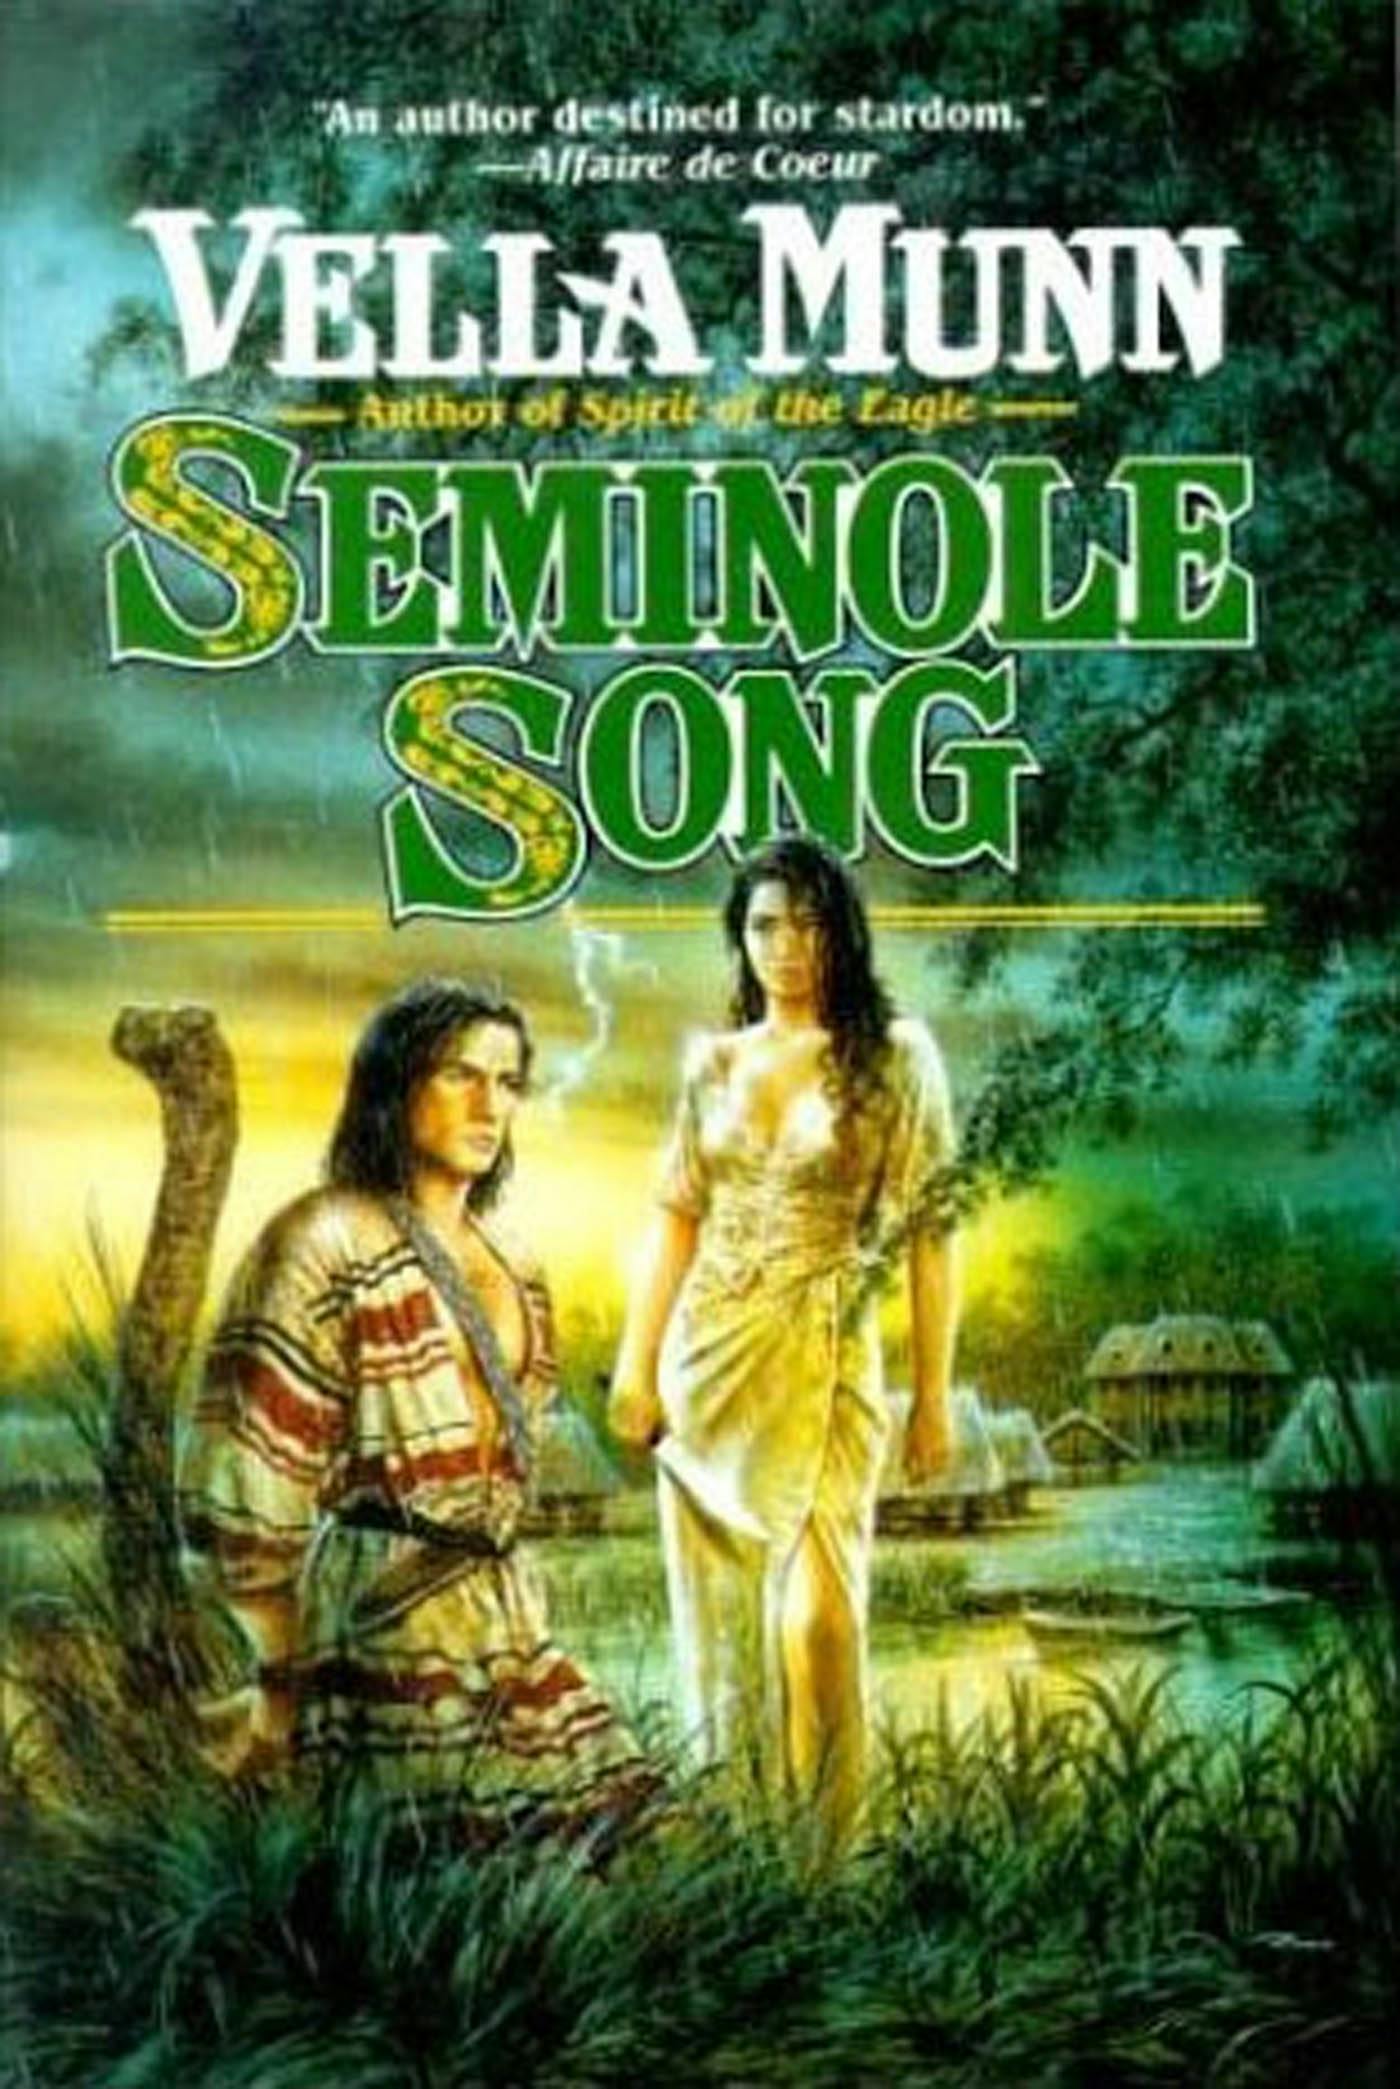 Cover for the book titled as: Seminole Song